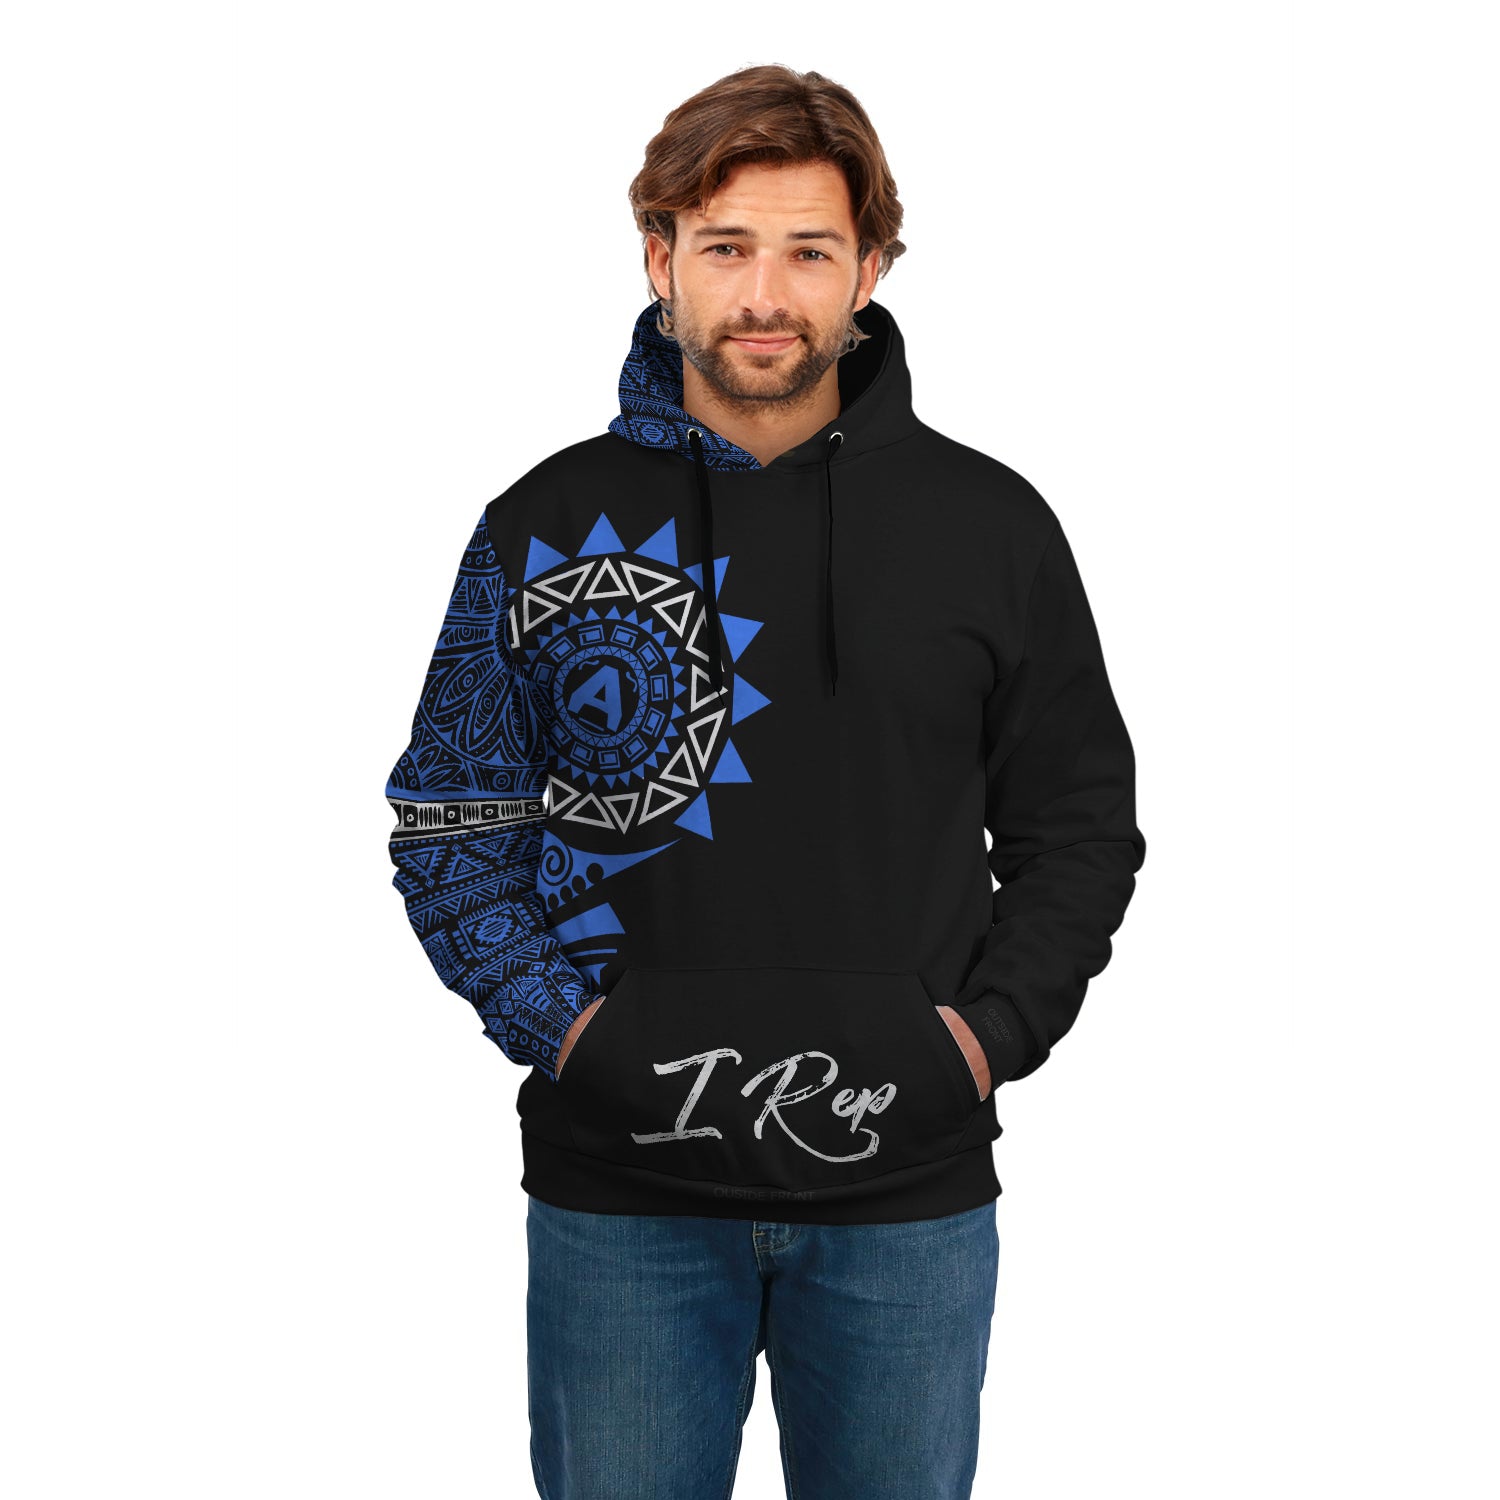 I REP FRONT POCKET HOODIE - Blue